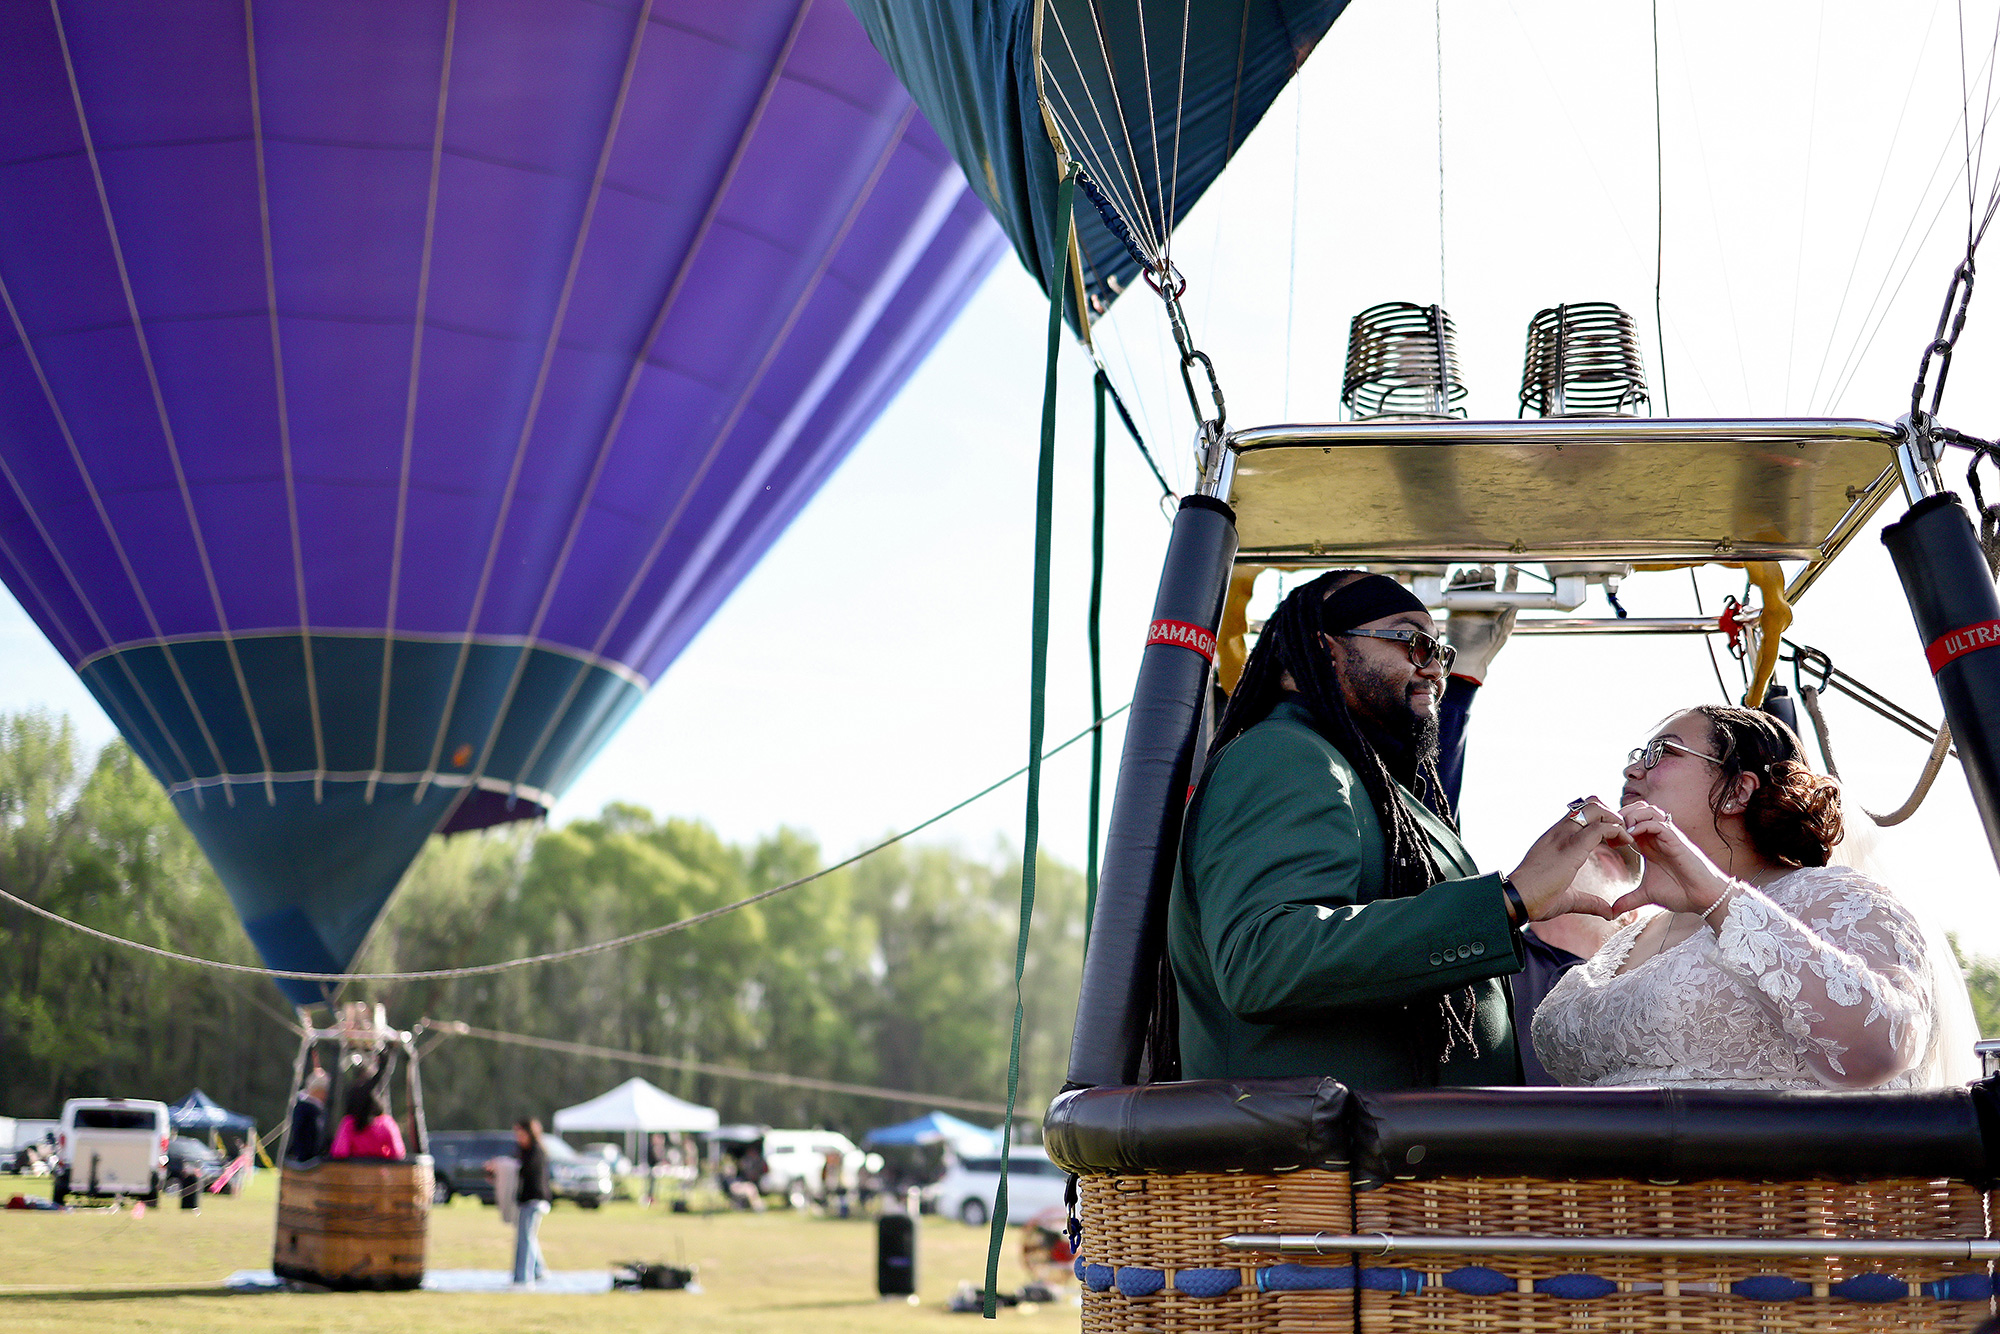 Kylee and Michael Rice prepare to take a hot air balloon ride before a planned mass wedding of over 200 couples in Russellville, Arkansas. 